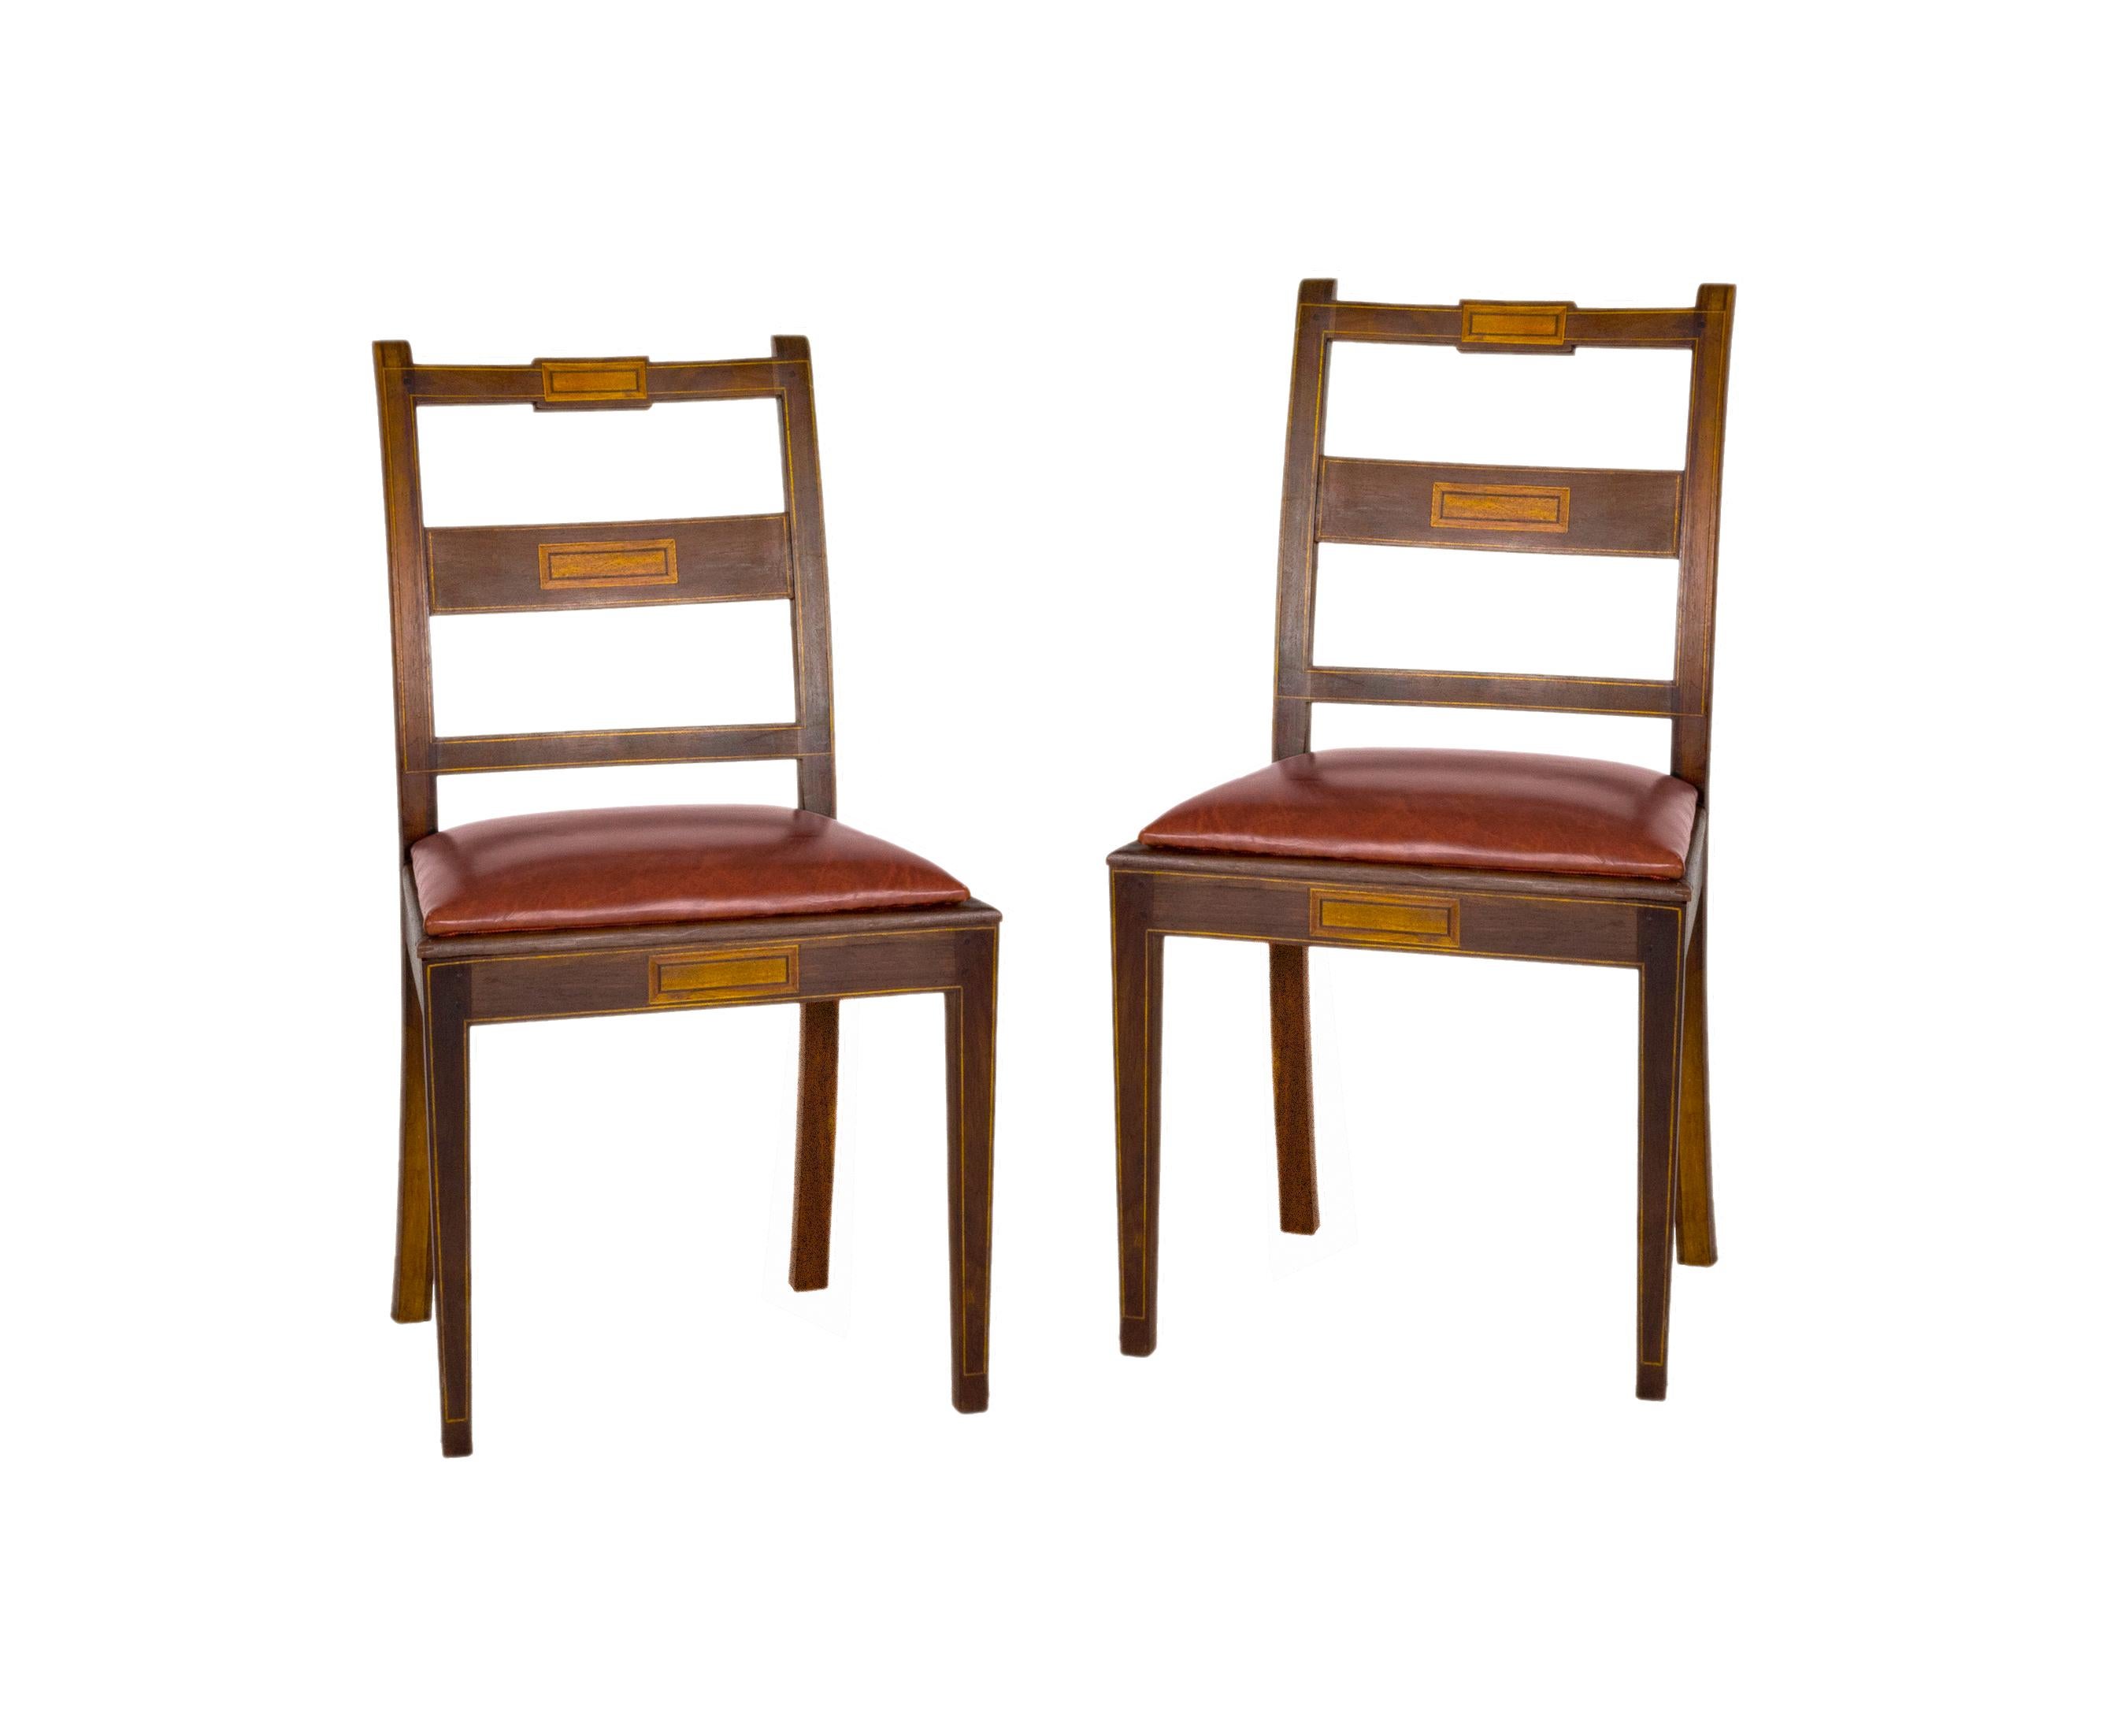 Set of Six Portuguese Chairs, Straw & Leather, 20th Century For Sale 2